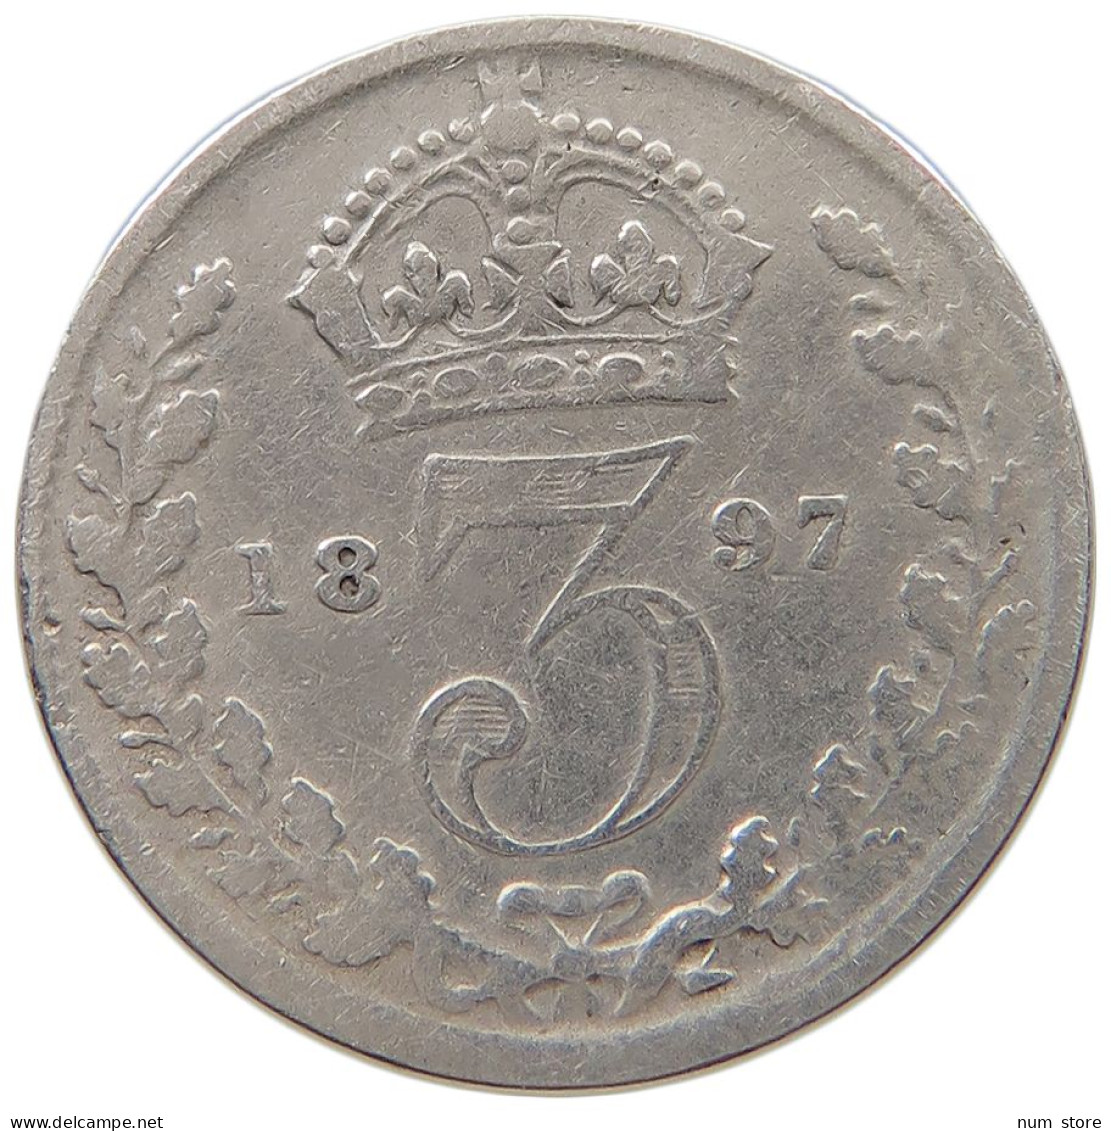 GREAT BRITAIN THREEPENCE 1897 Victoria 1837-1901 #a045 0879 - F. 3 Pence